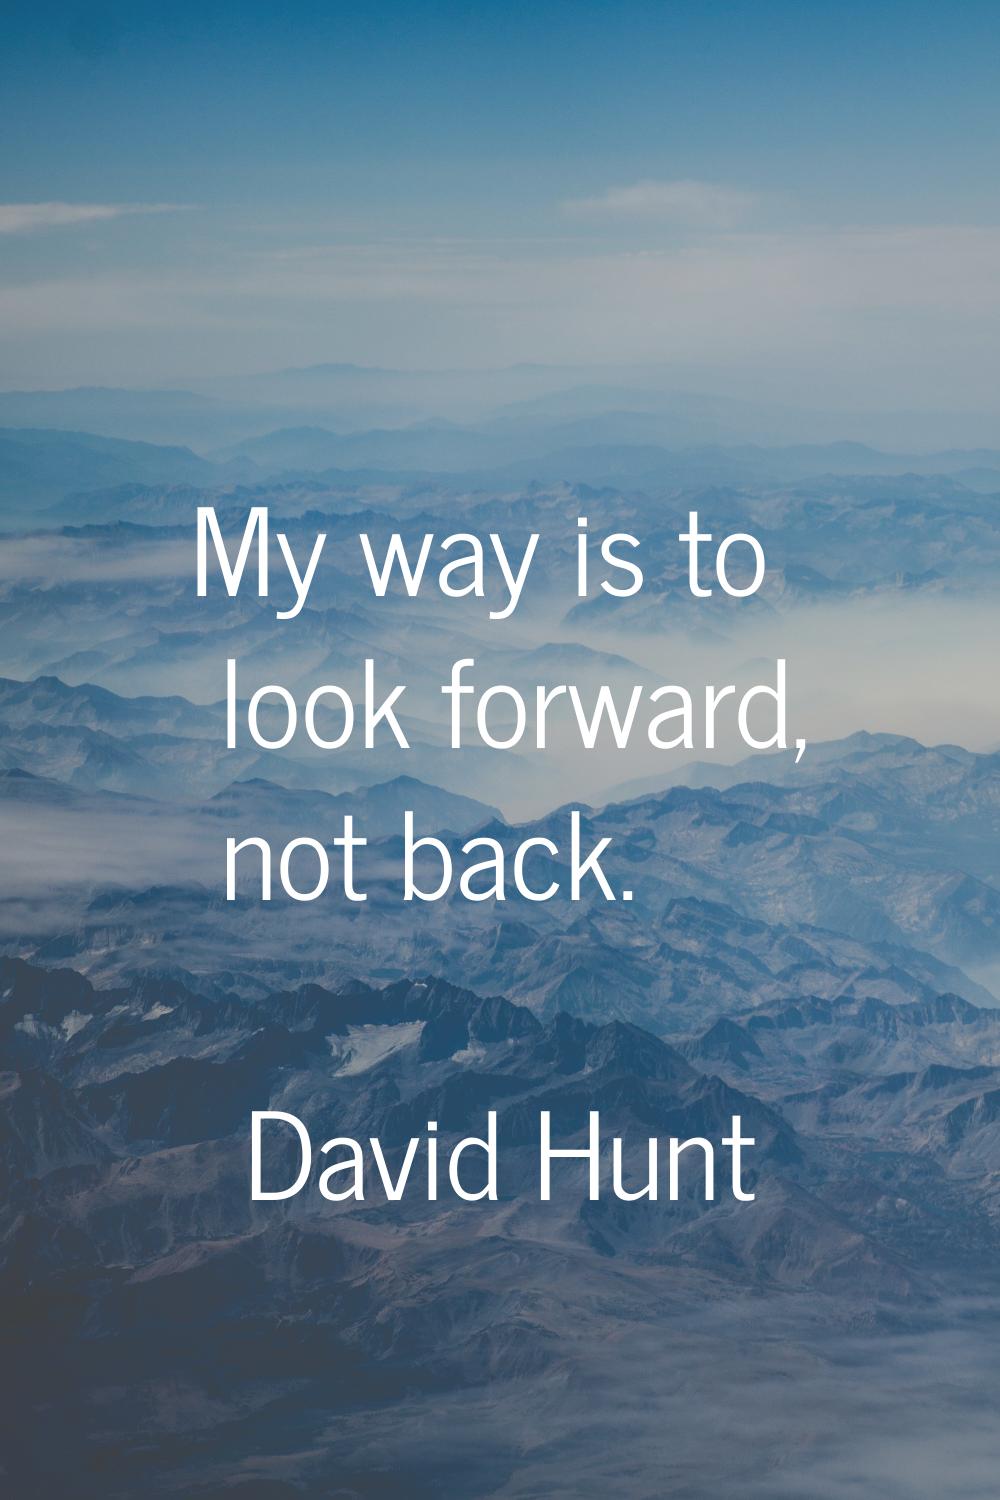 My way is to look forward, not back.